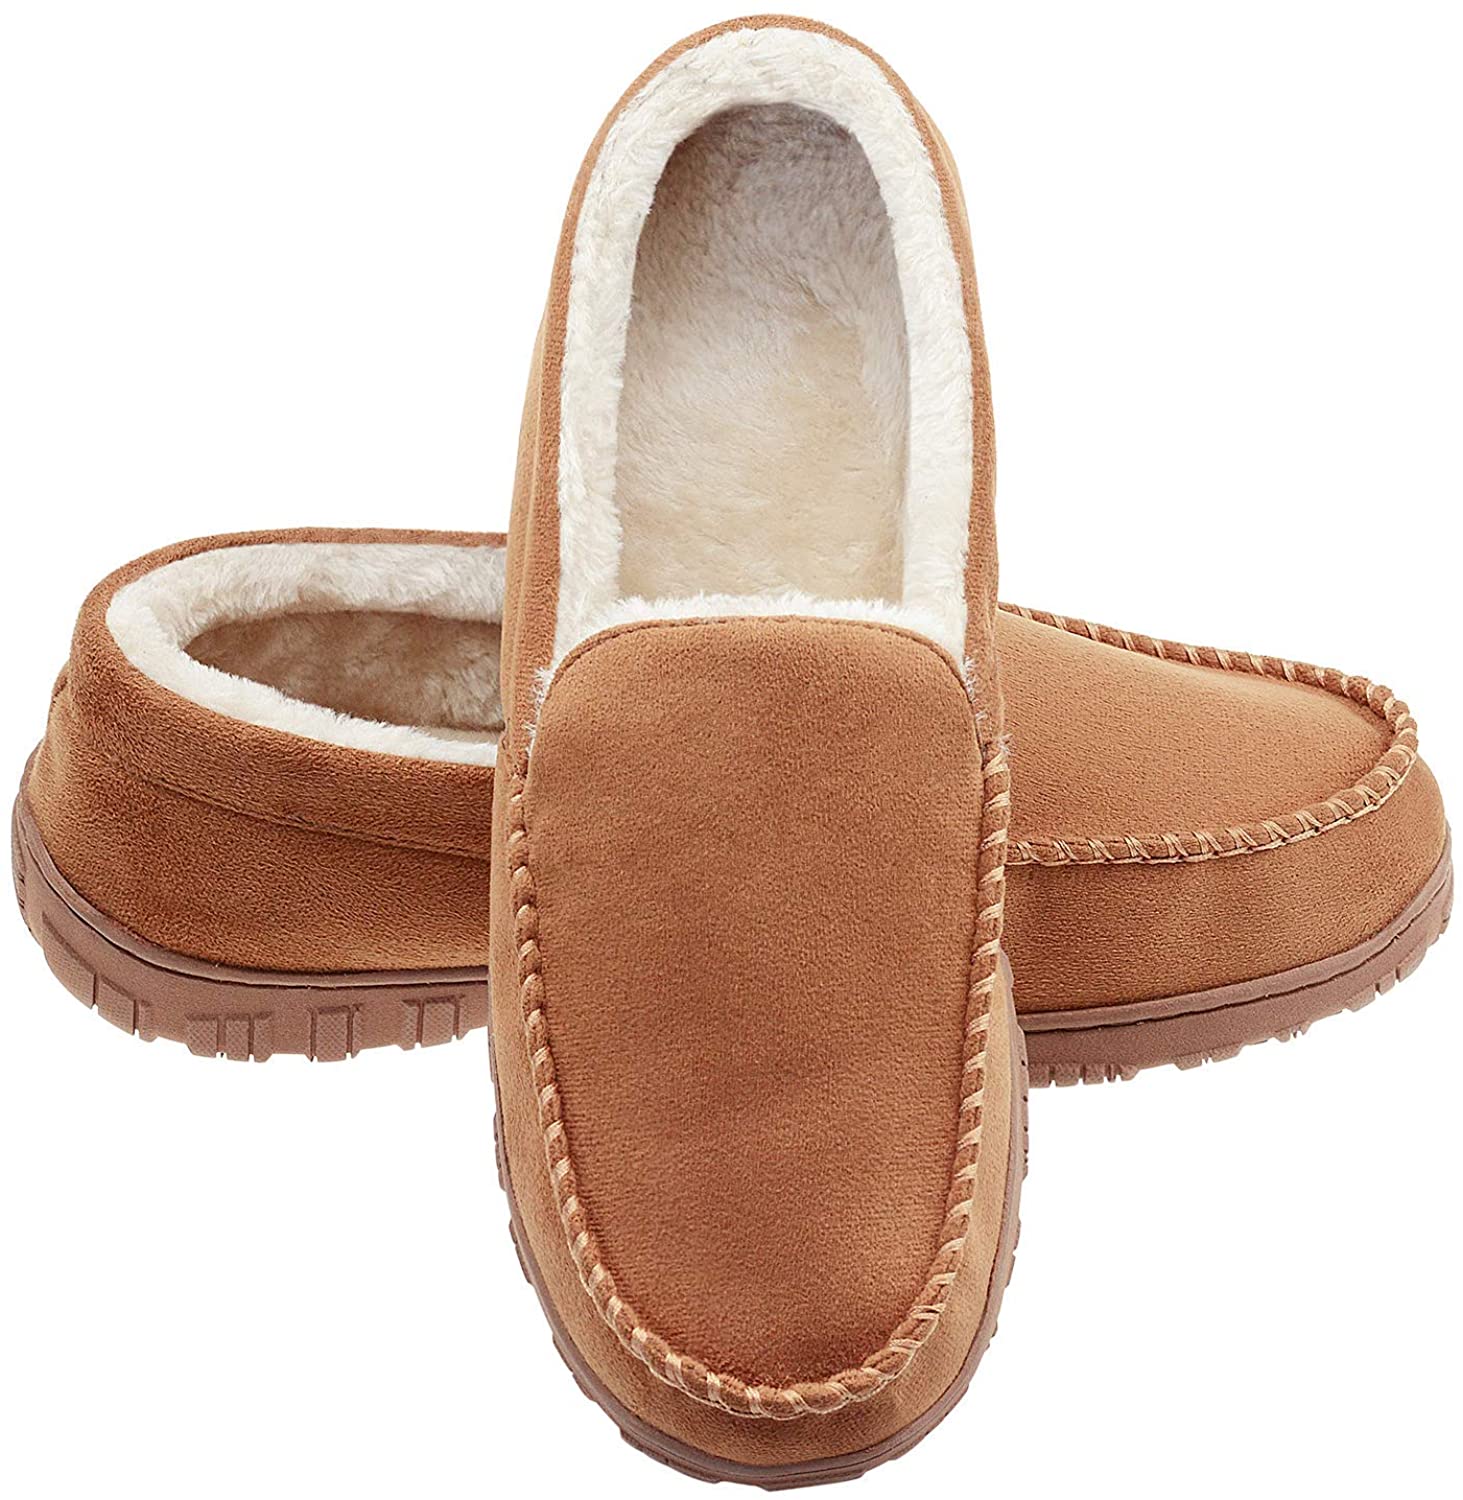 LULEX Moccasin Slippers for Men with Memory Foam Indoor Outdoor Sole Non Skid House Shoes 